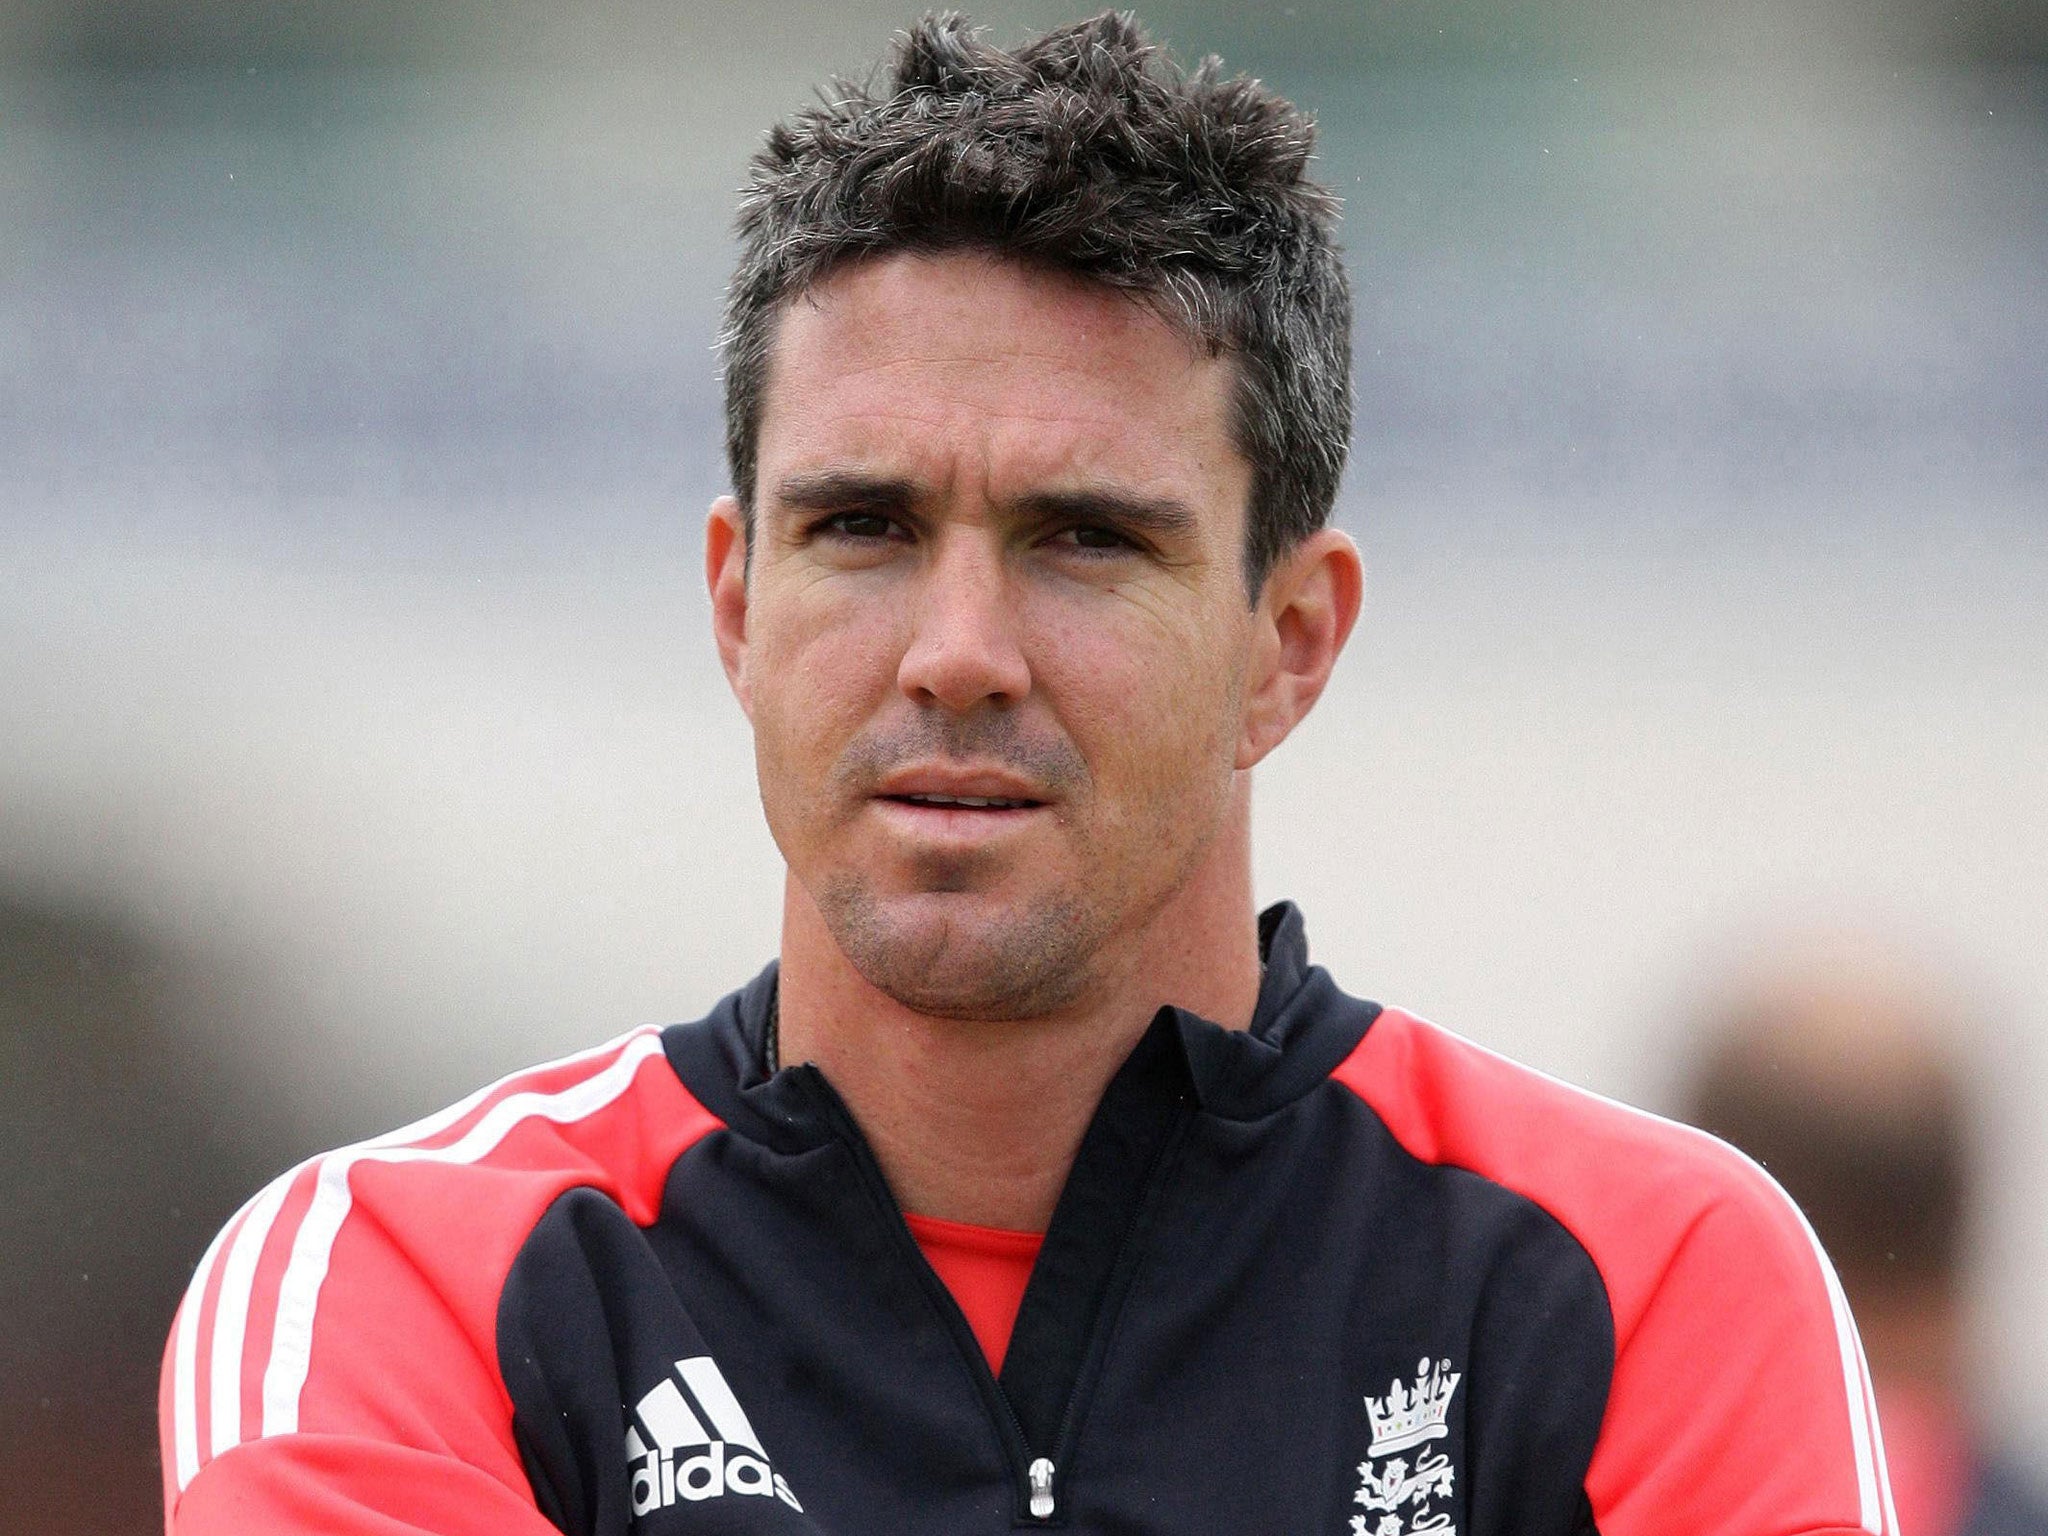 Kevin Pietersen: Back from injury, the star batsman plays for Surrey today and then England in T20